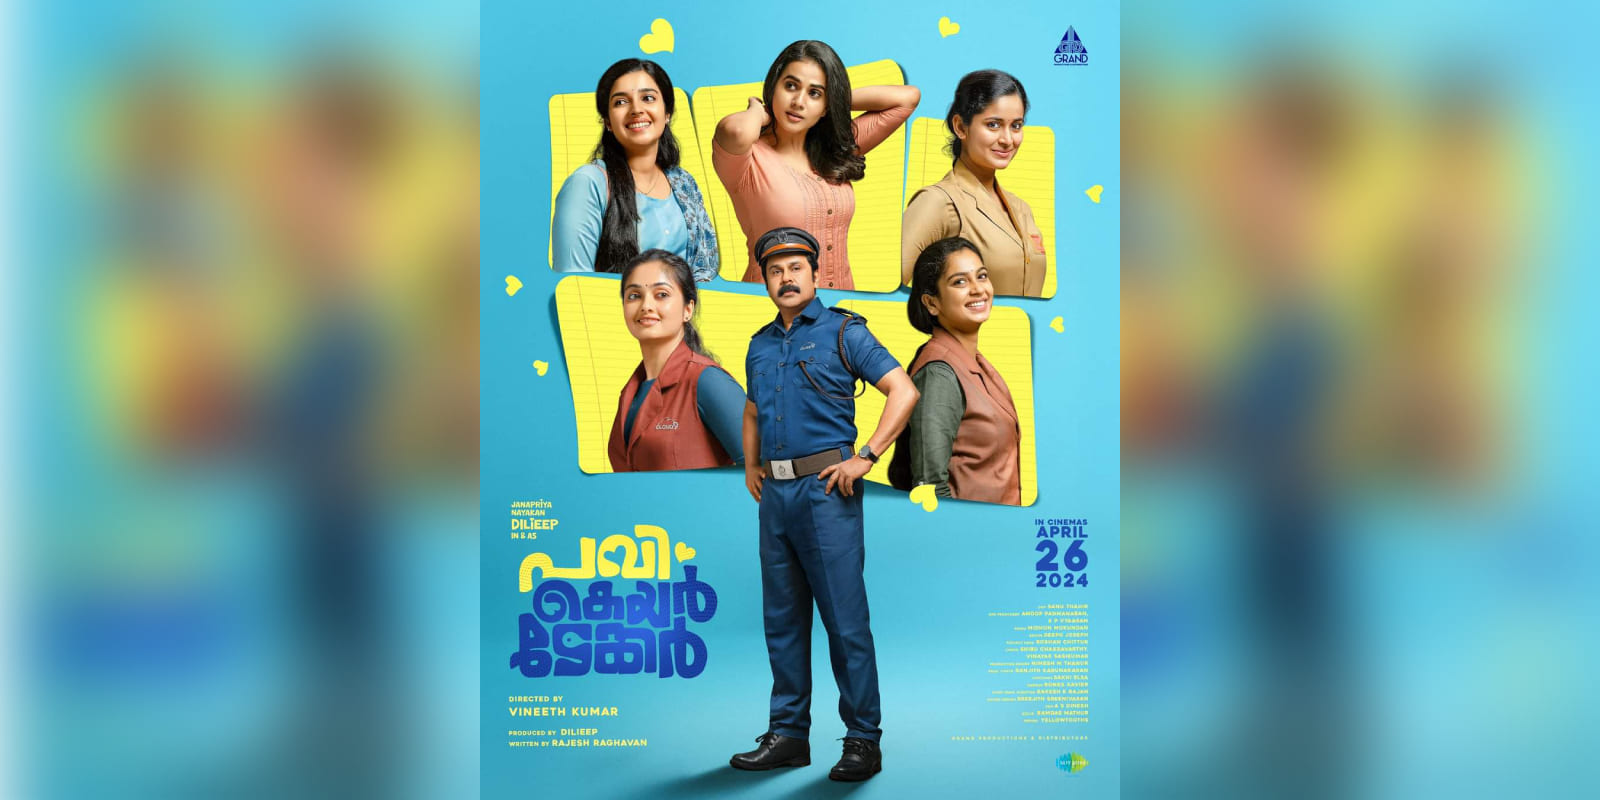 Pavi Caretaker is a comedy entertainer directed by Vineeth Kumar